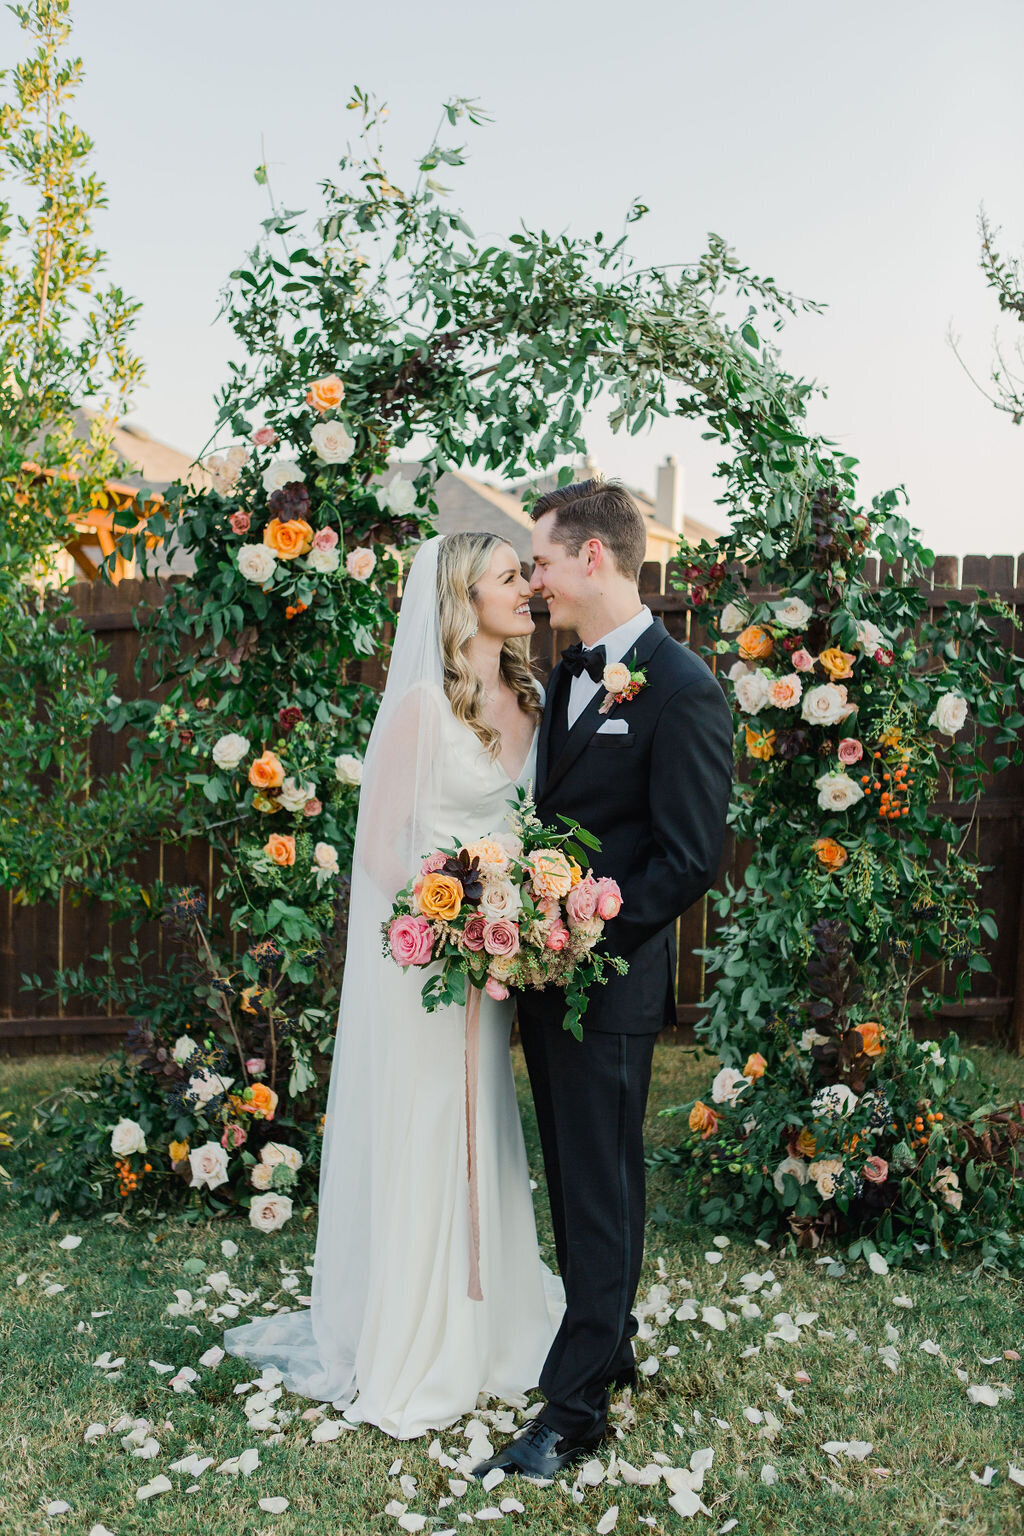 Wedding ceremony in Fort Worth with Floral Arch by Vella Nest Floral - Best Dallas Wedding Florist